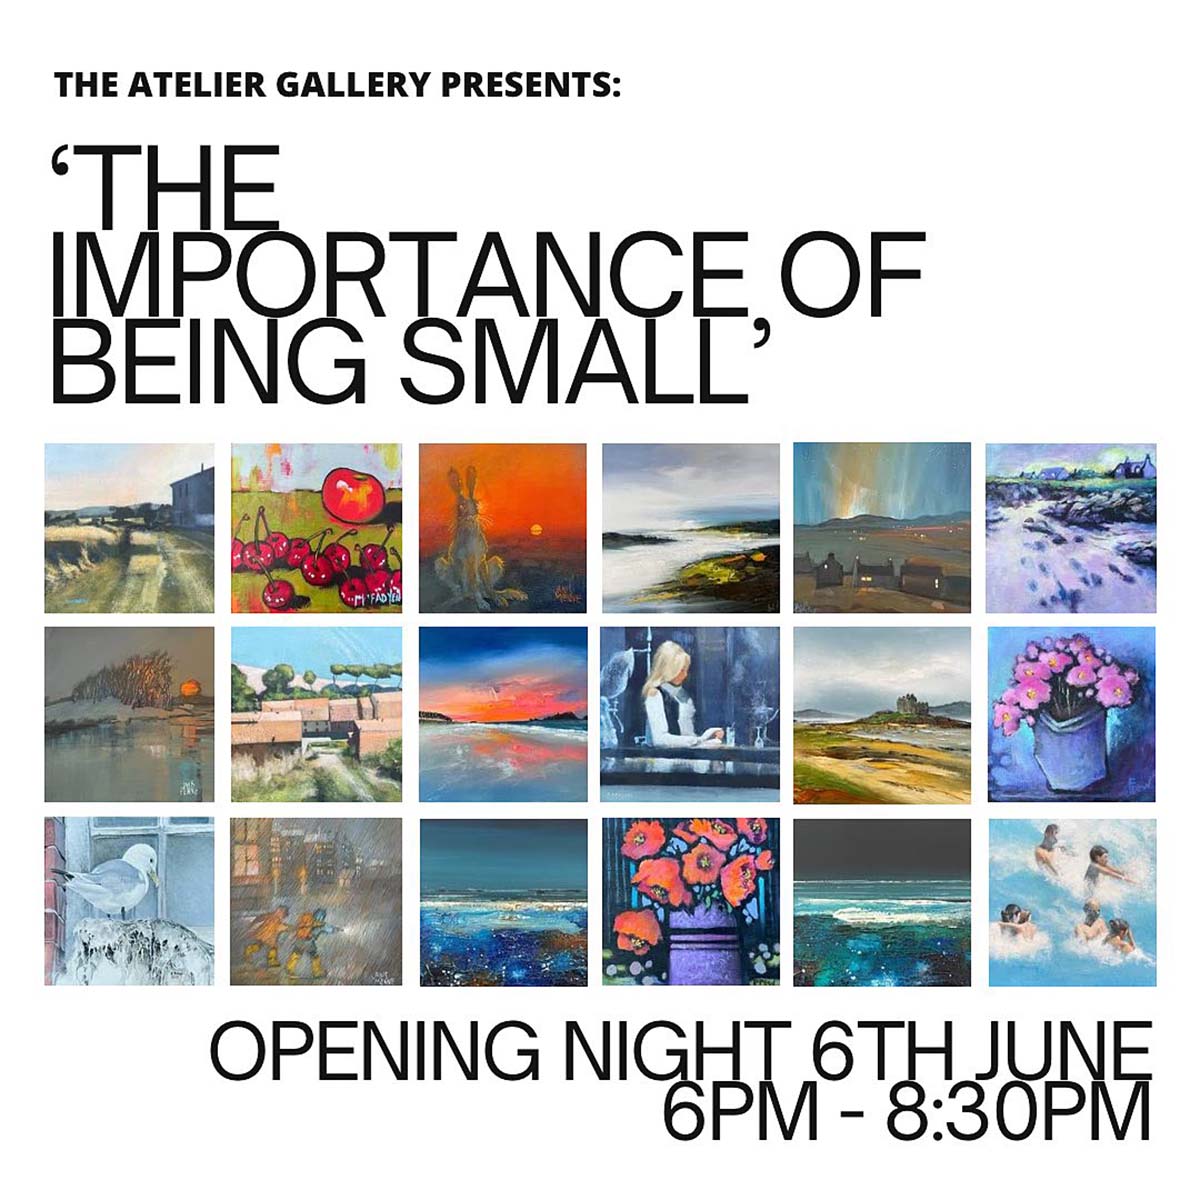 Pictured is Atelier Gallery's poster for their NT Art Month exhibition, 'The Importance of Being Small'.